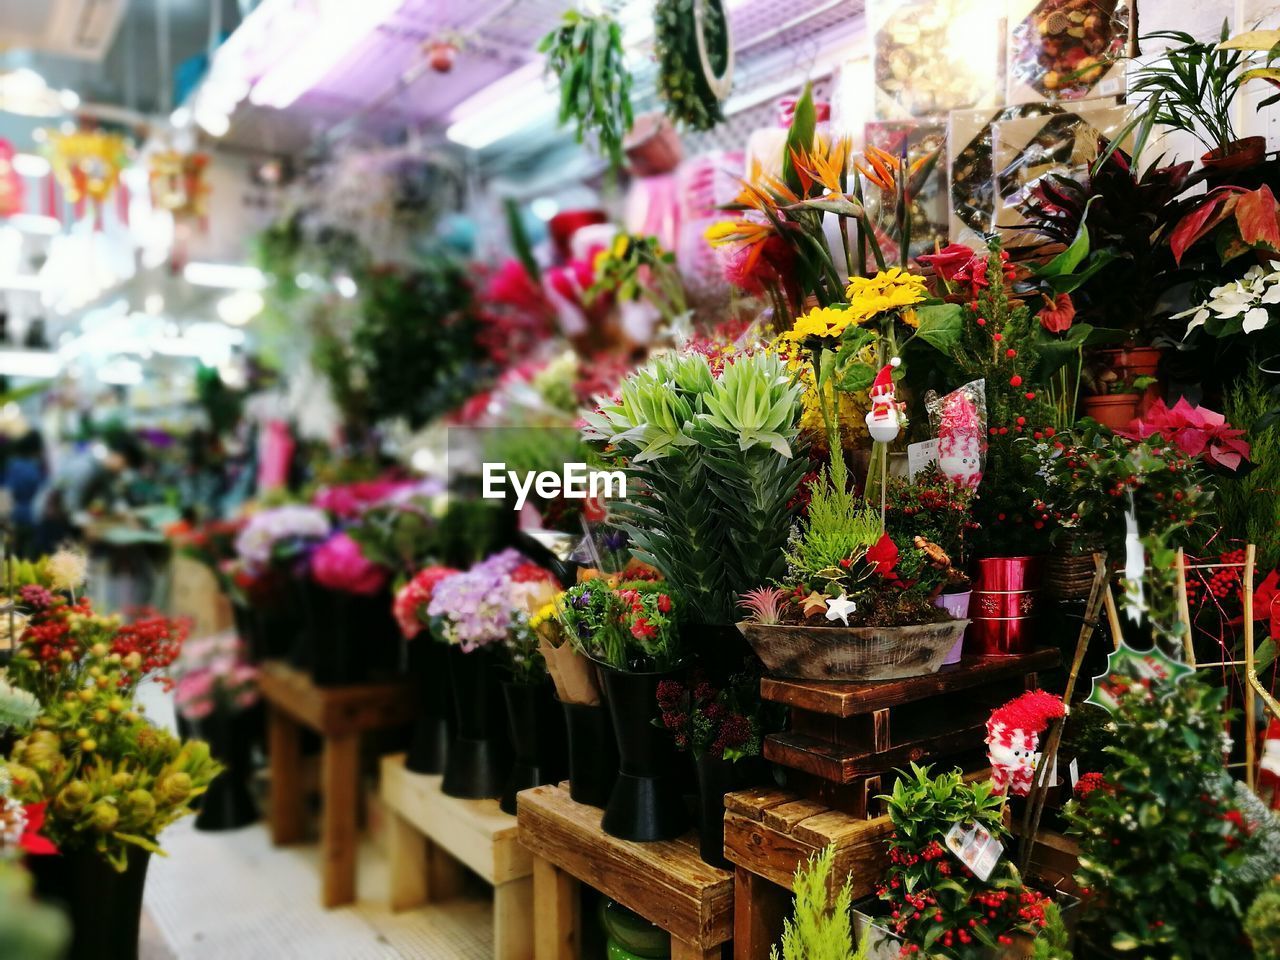 CLOSE-UP OF FLOWERS IN MARKET